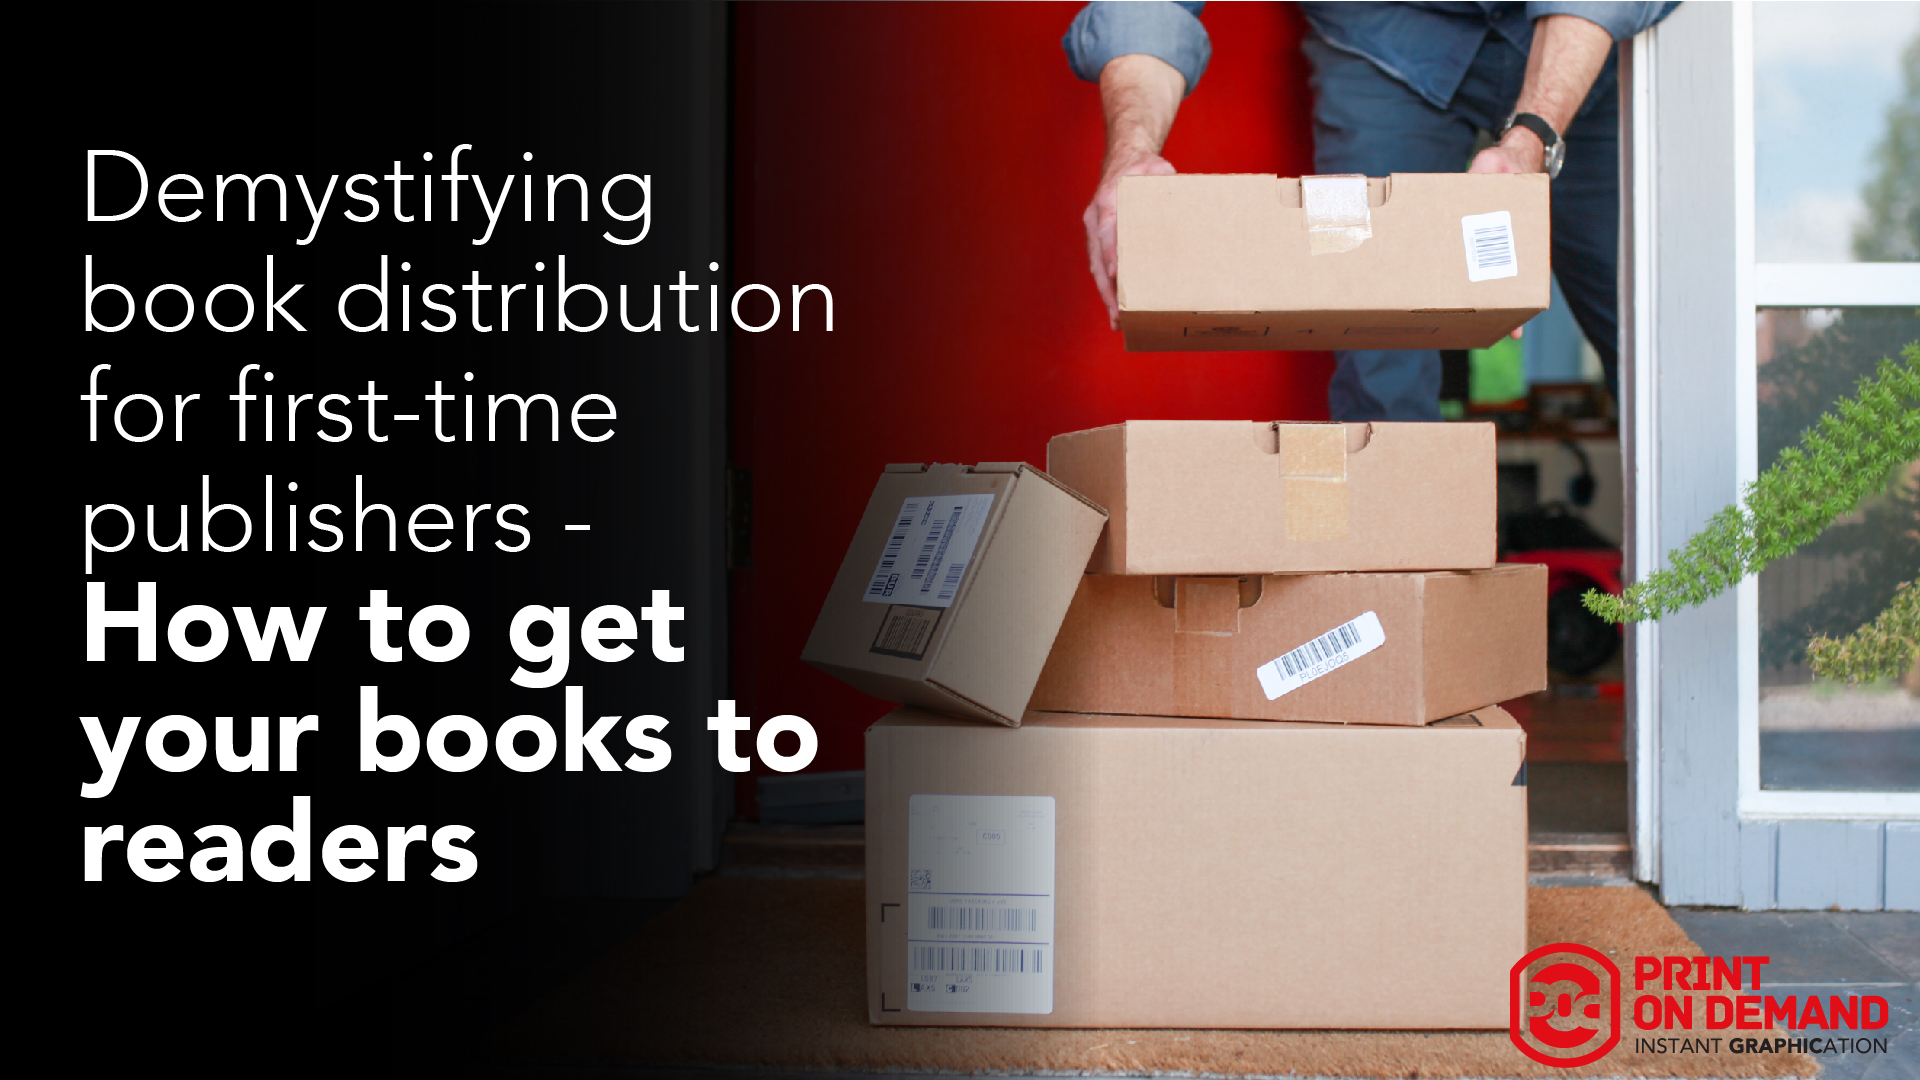 Demystifying book distribution for first-time publishers - How to get your books to reader